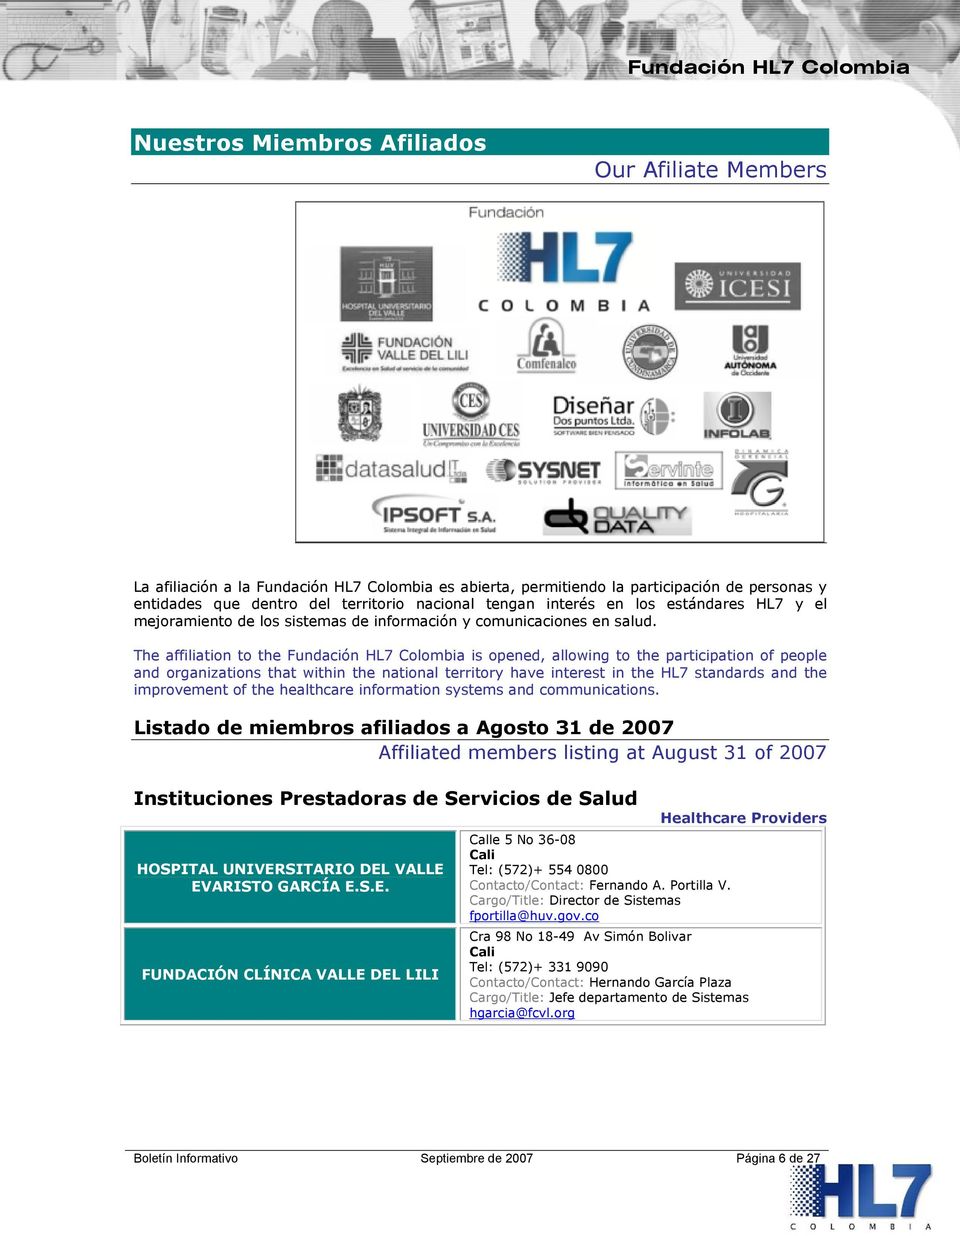 The affiliation to the Fundación HL7 Colombia is opened, allowing to the participation of people and organizations that within the national territory have interest in the HL7 standards and the